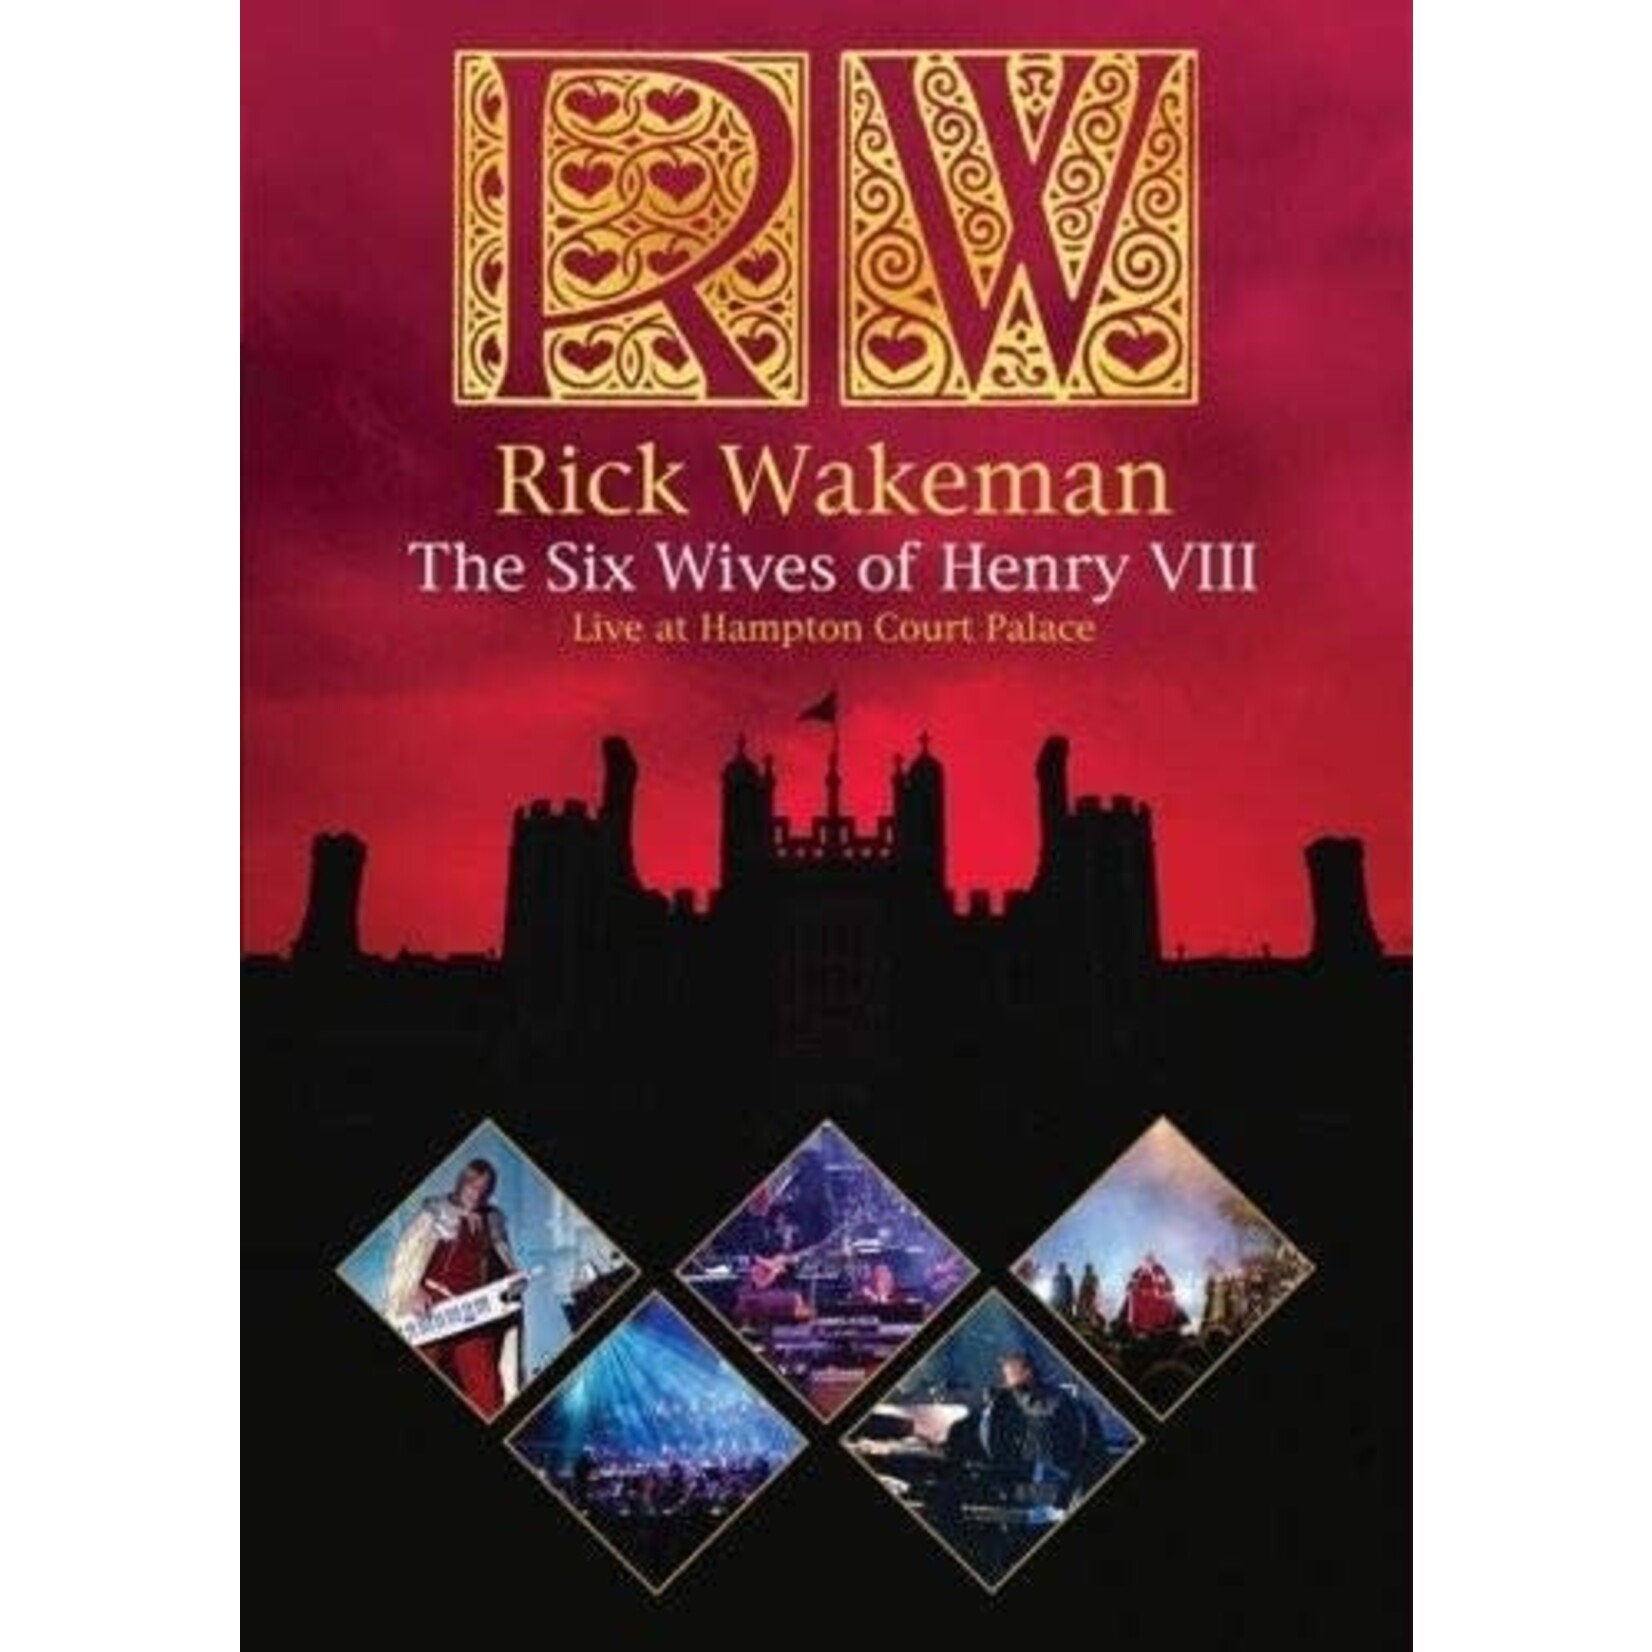 Rick Wakeman - The Six Wives Of Henry VIII: Live At Hampton Court Palace [USED DVD]